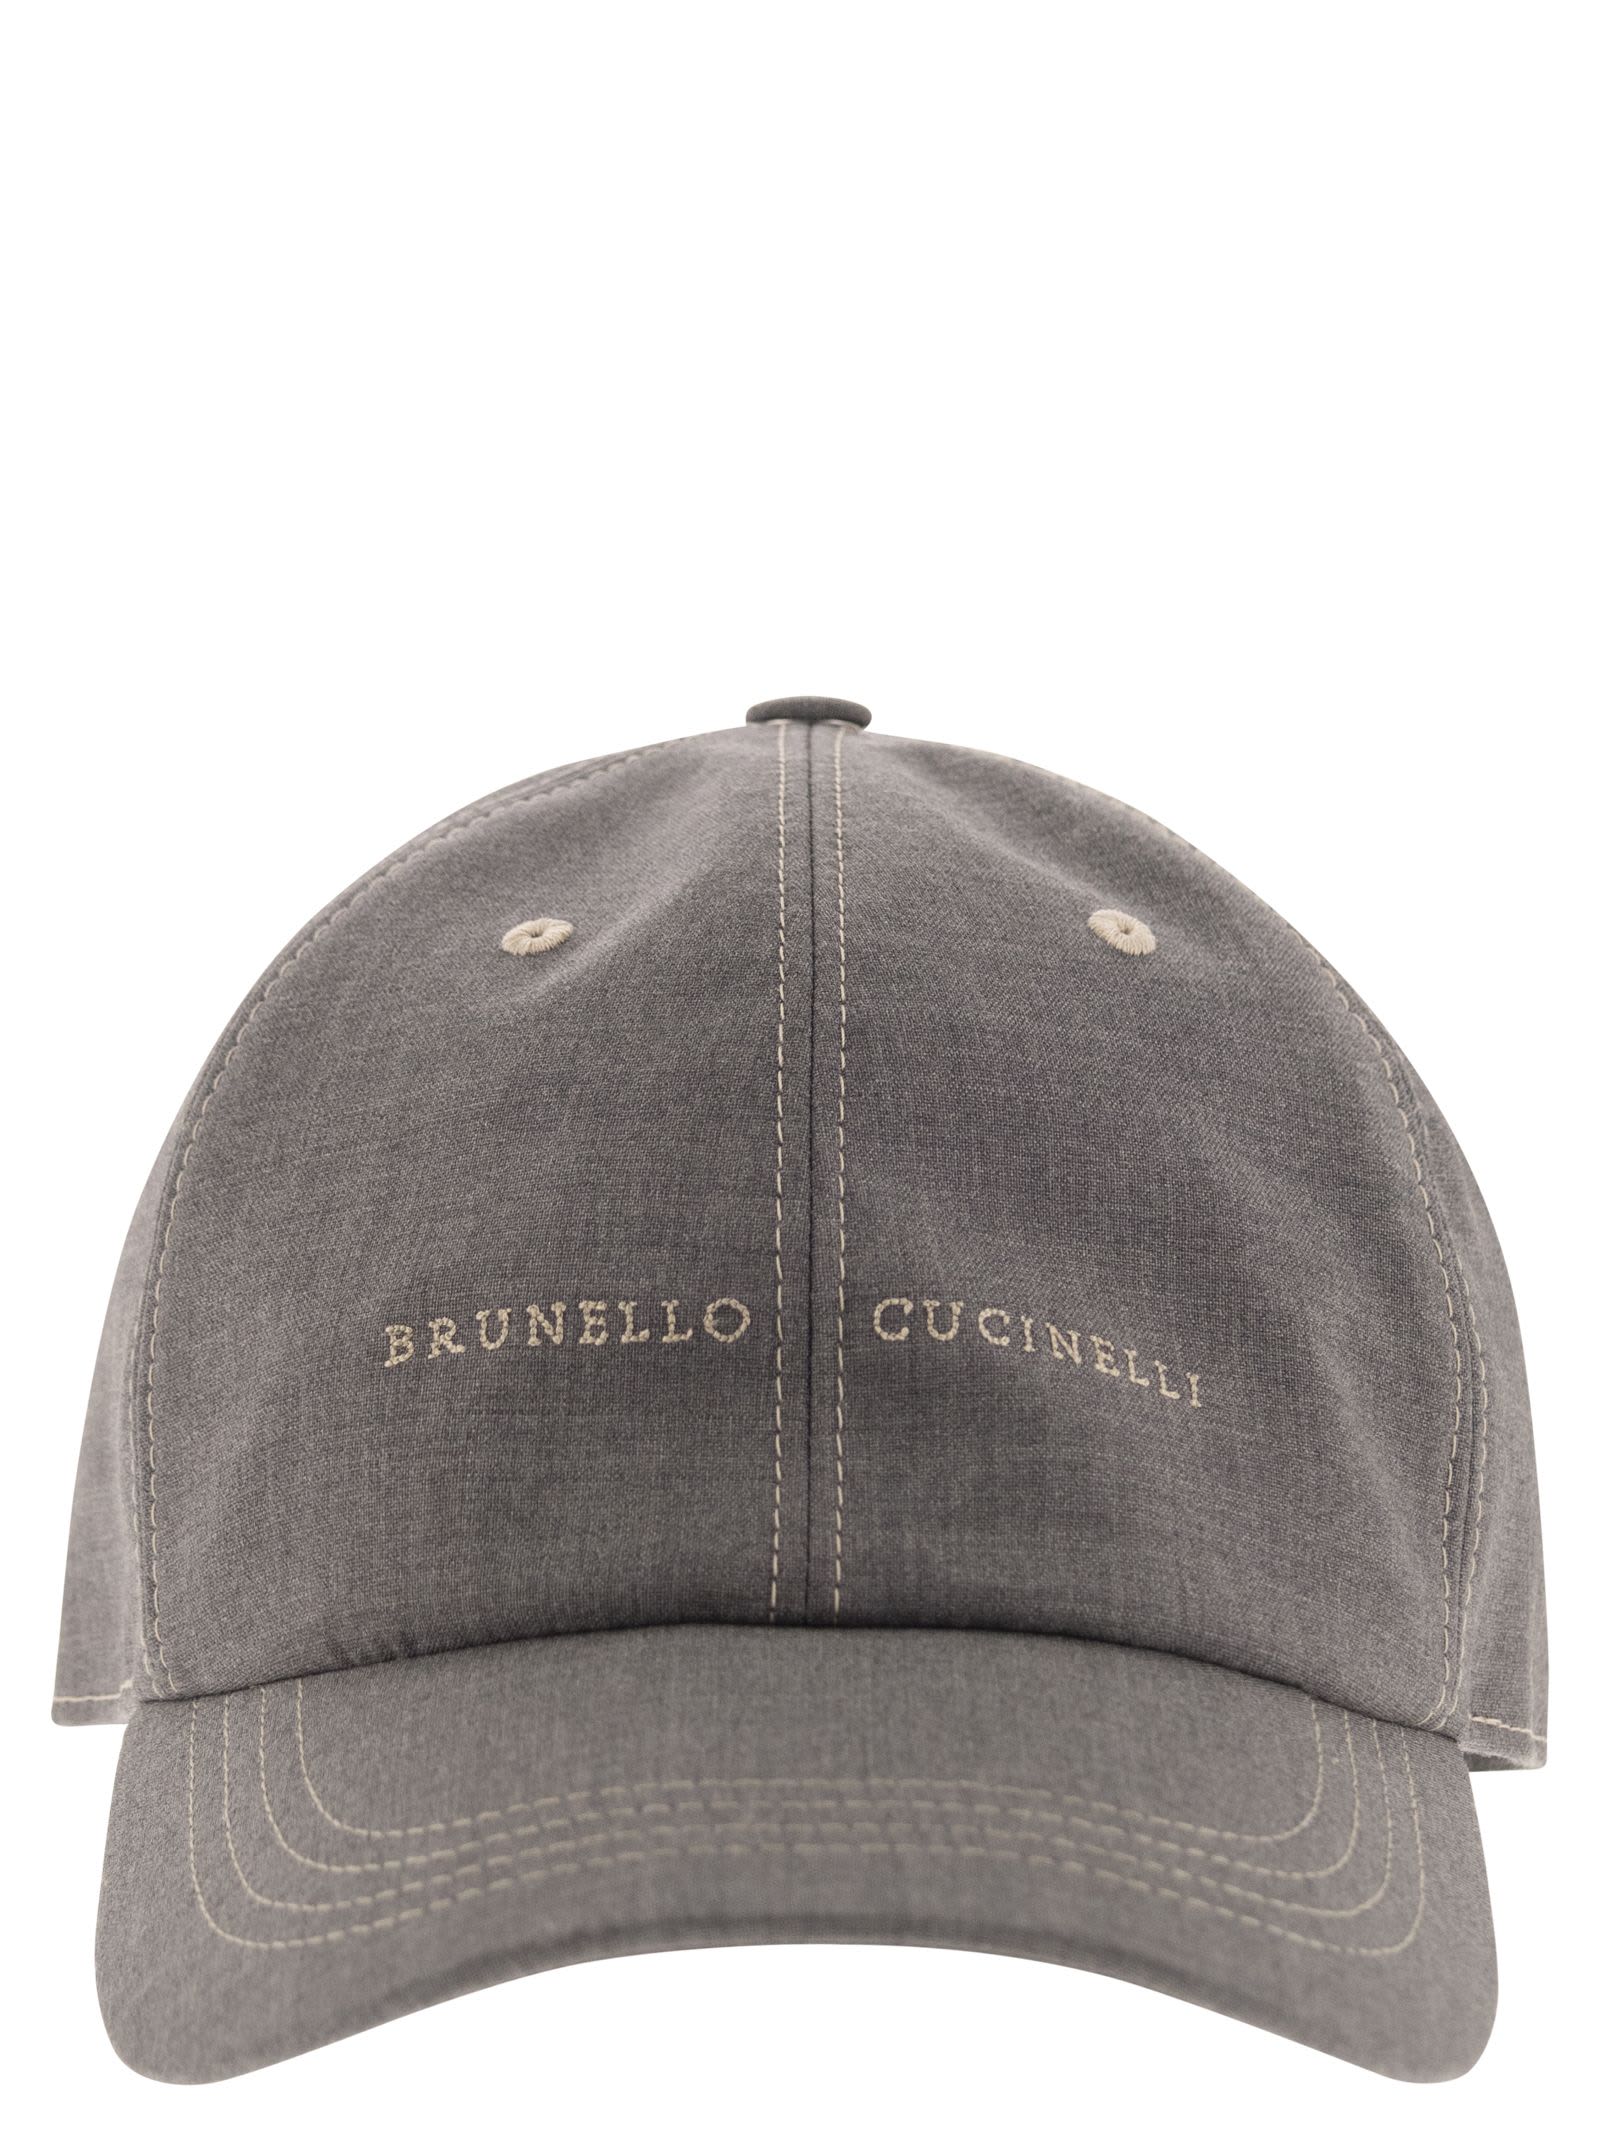 Brunello Cucinelli Natural Comfort Virgin Wool Canvas Baseball Cap With Embroidery